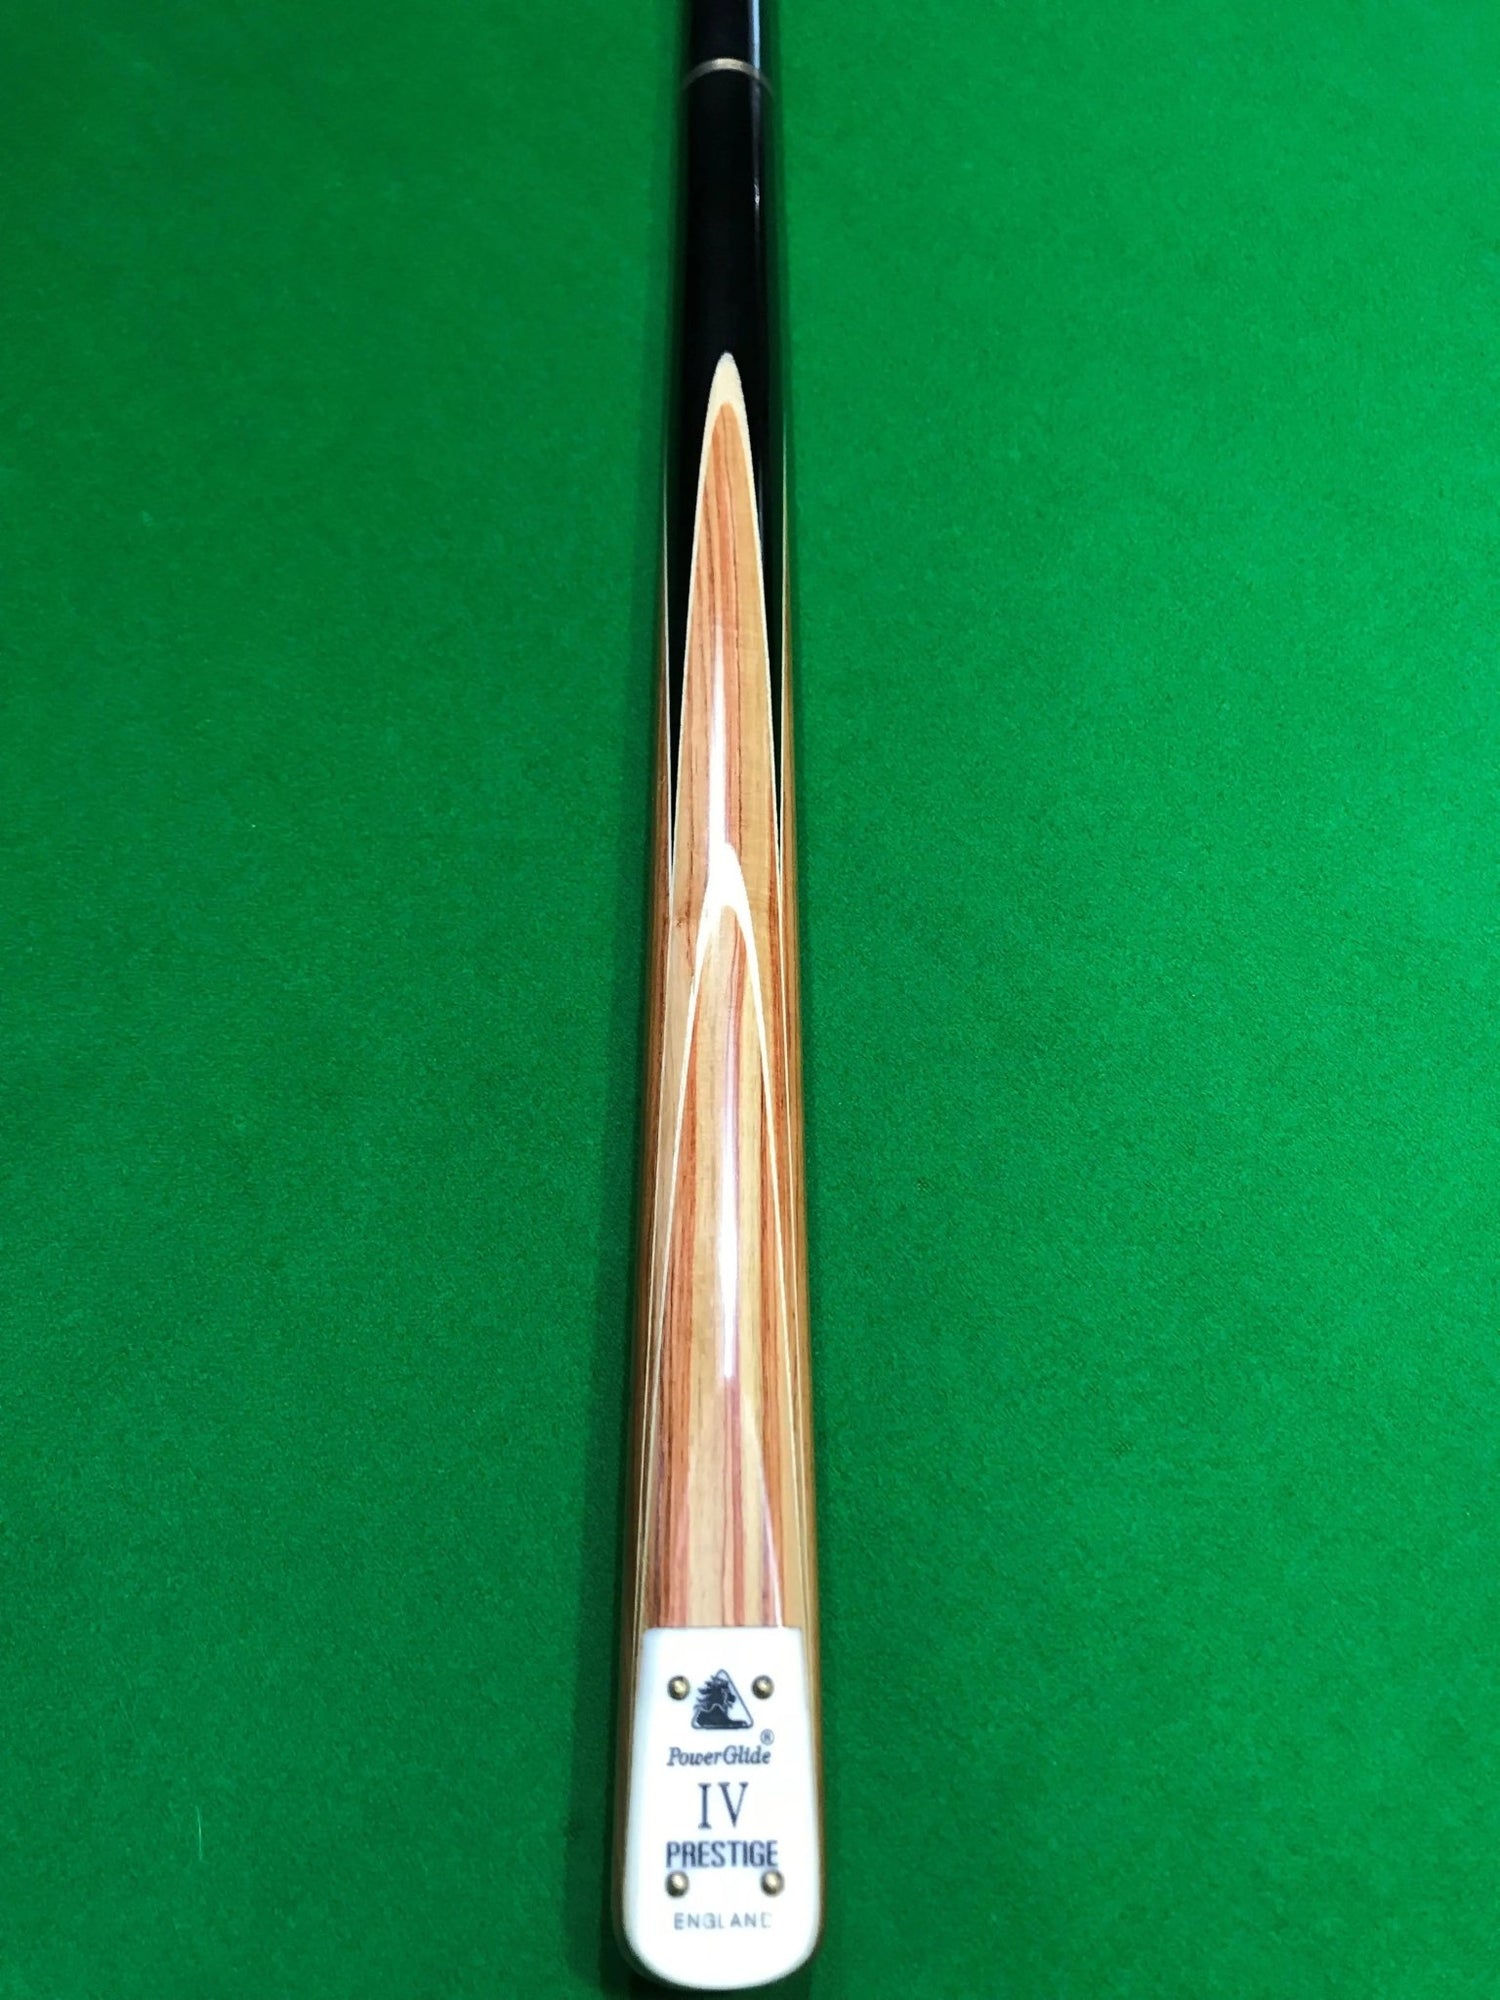 POWERGLIDE Prestige IV Hand Made 3/4 Pool, Snooker & Billiard Ash Cue with Butt Extension - Q-Masters